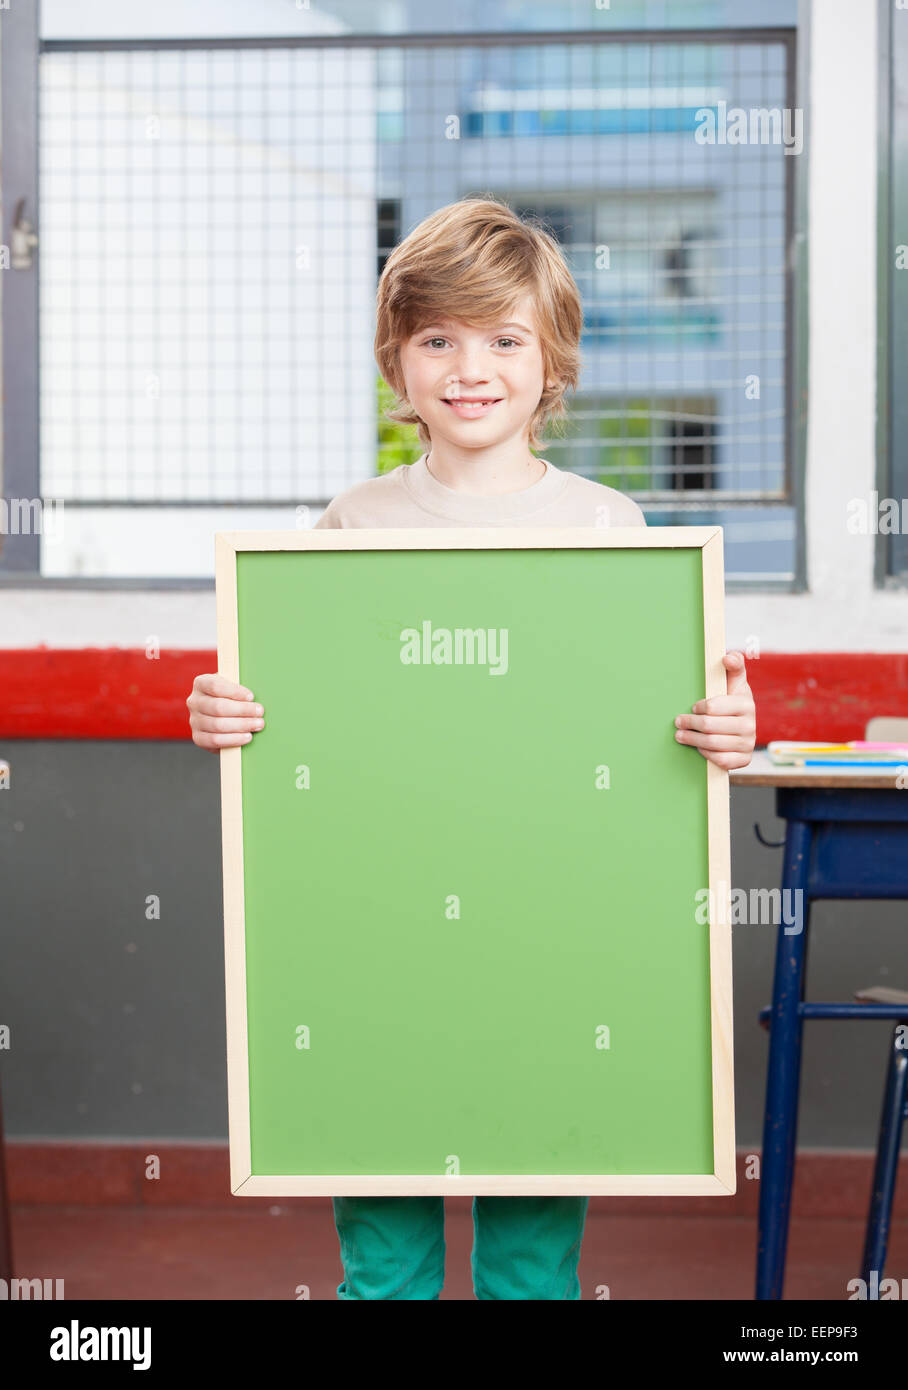 Smiling kid at primary school holding empty green chalkboard. Stock Photo